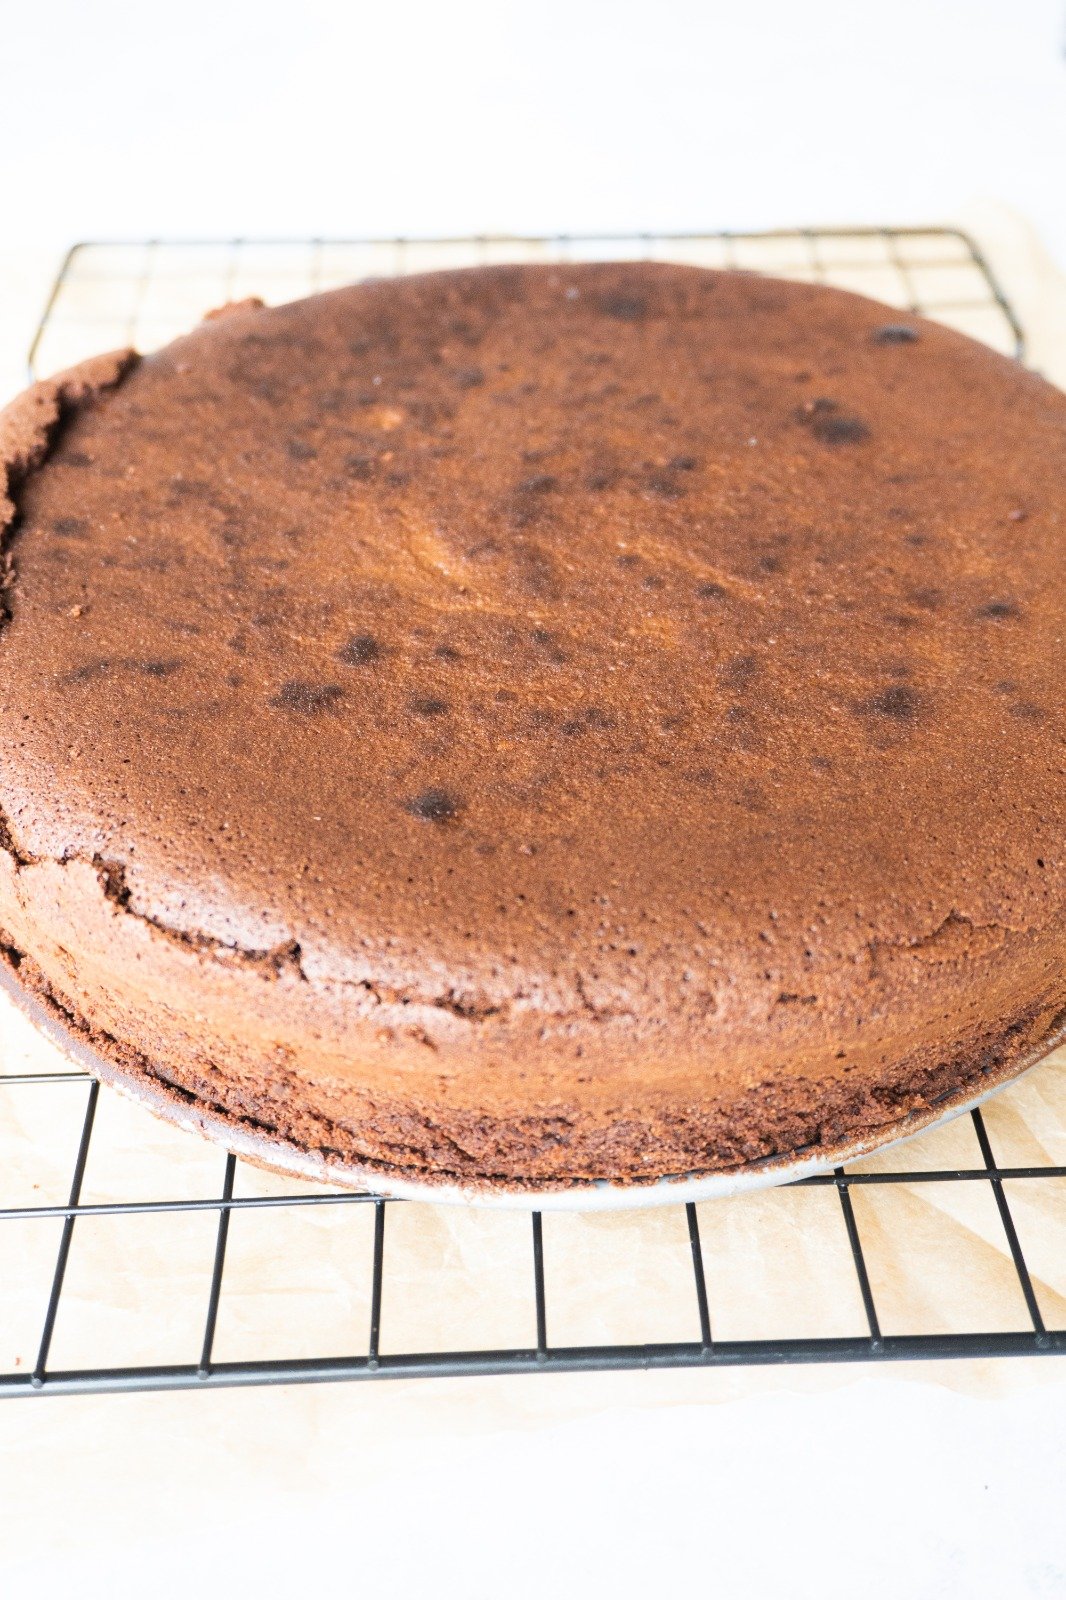 Tasty Flourless Chocolate Cake to serve family, friends and guests.